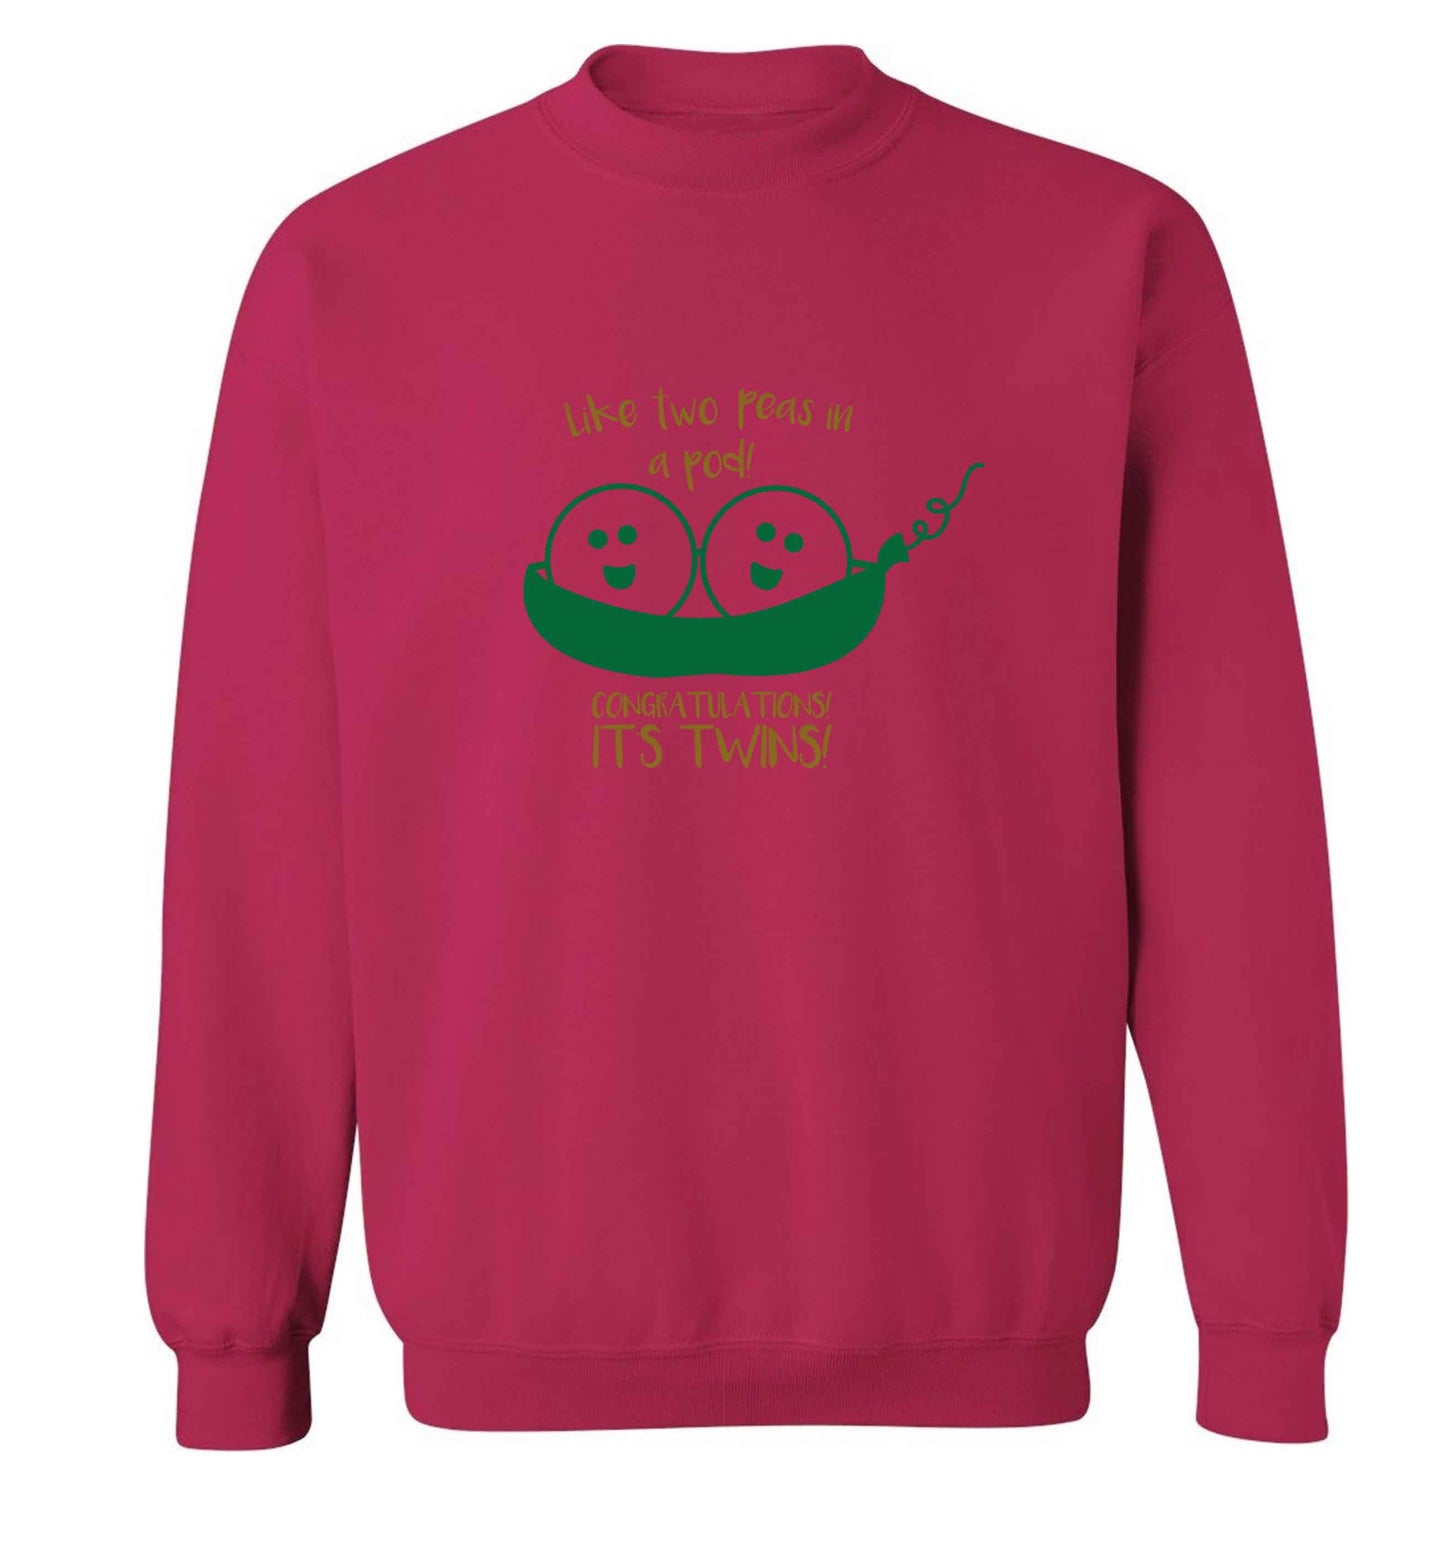 Like two peas in a pod! Congratulations it's twins! adult's unisex pink sweater 2XL